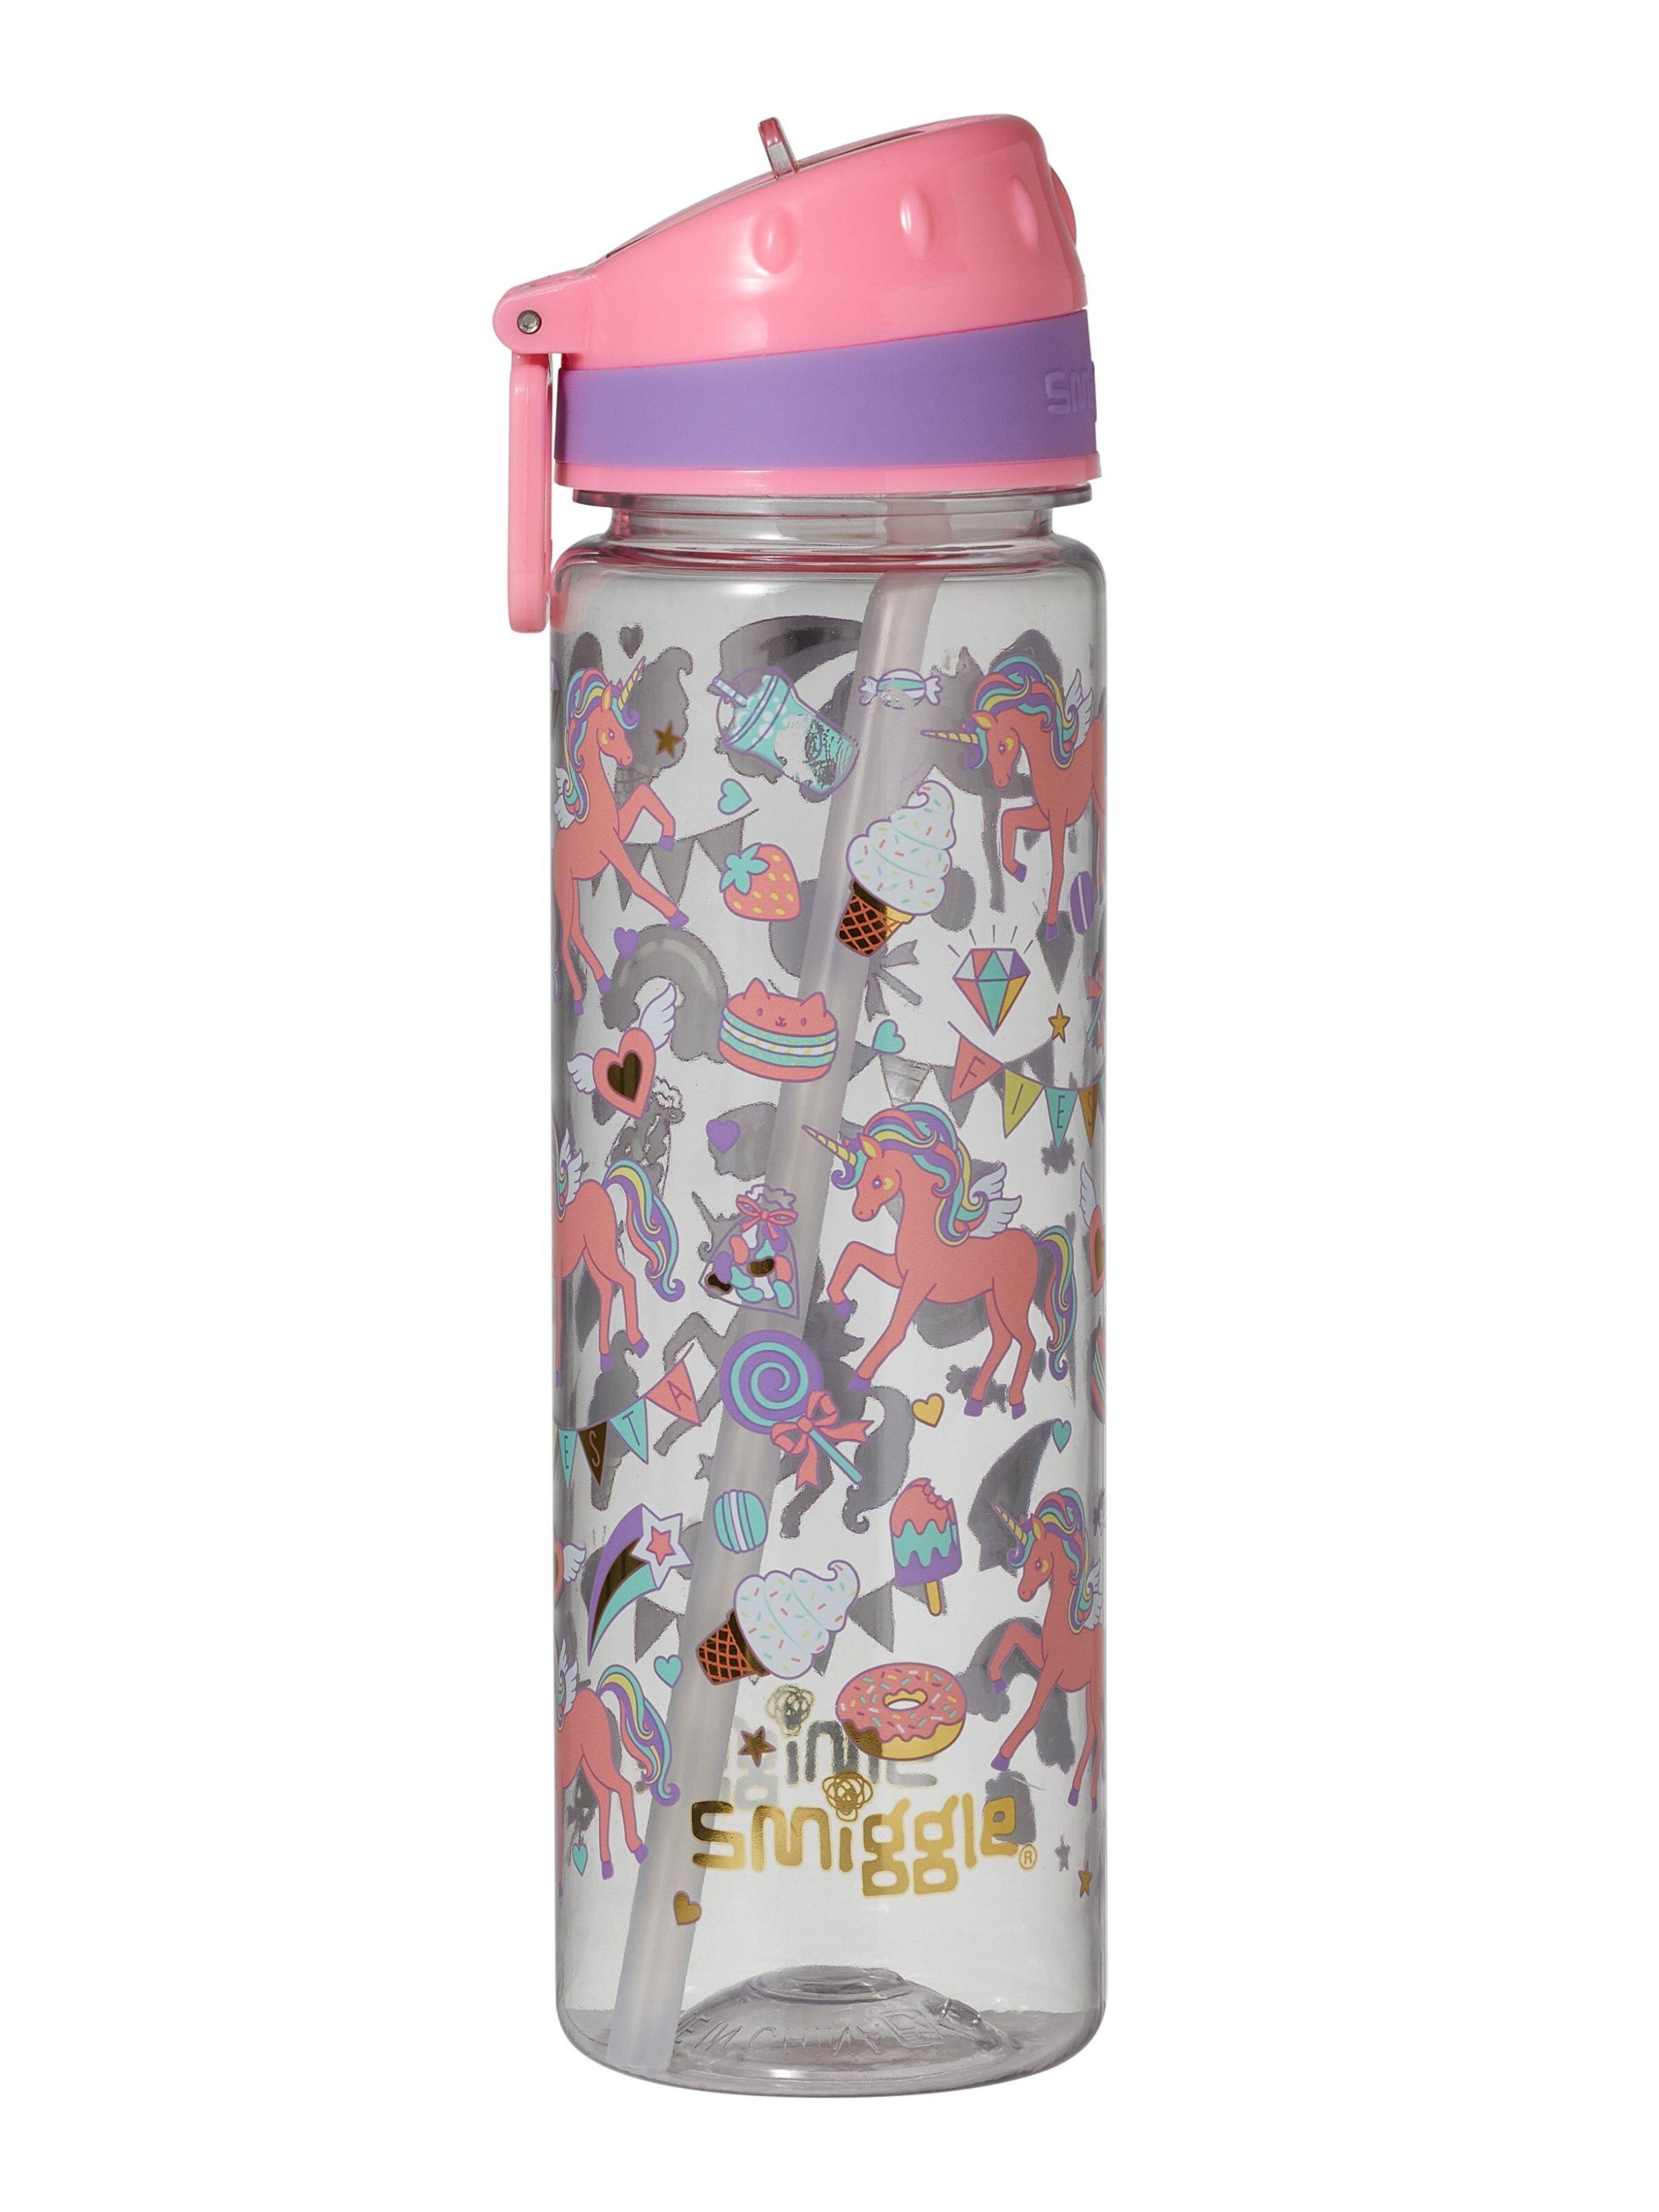 Drink Bottles - Drink Up the Fun with Smiggle